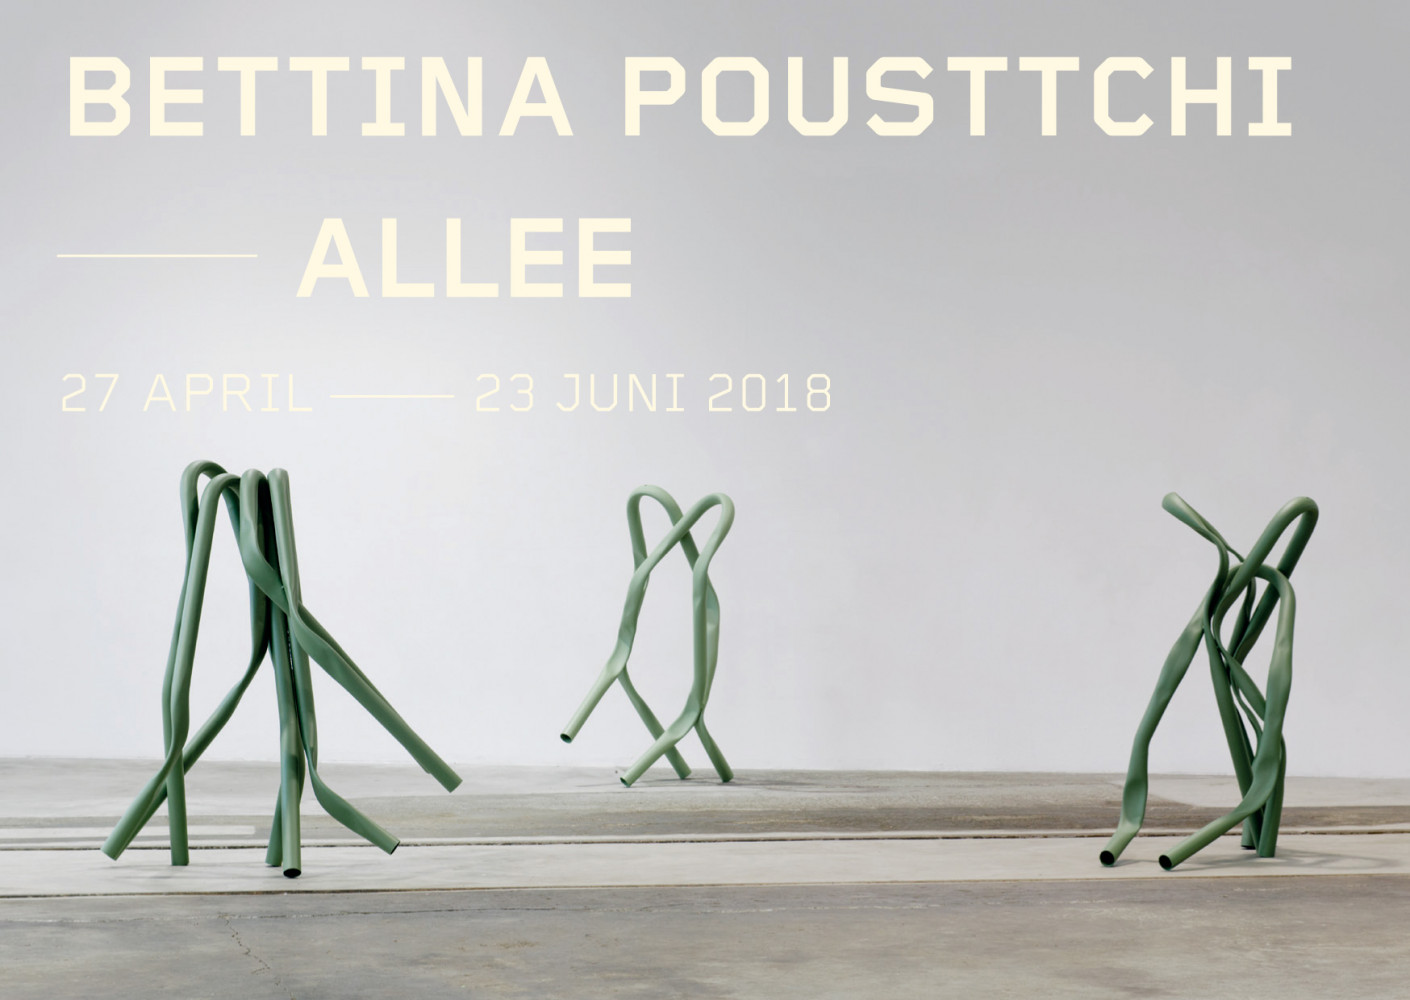 Bettina Pousttchi, ‘Allee’